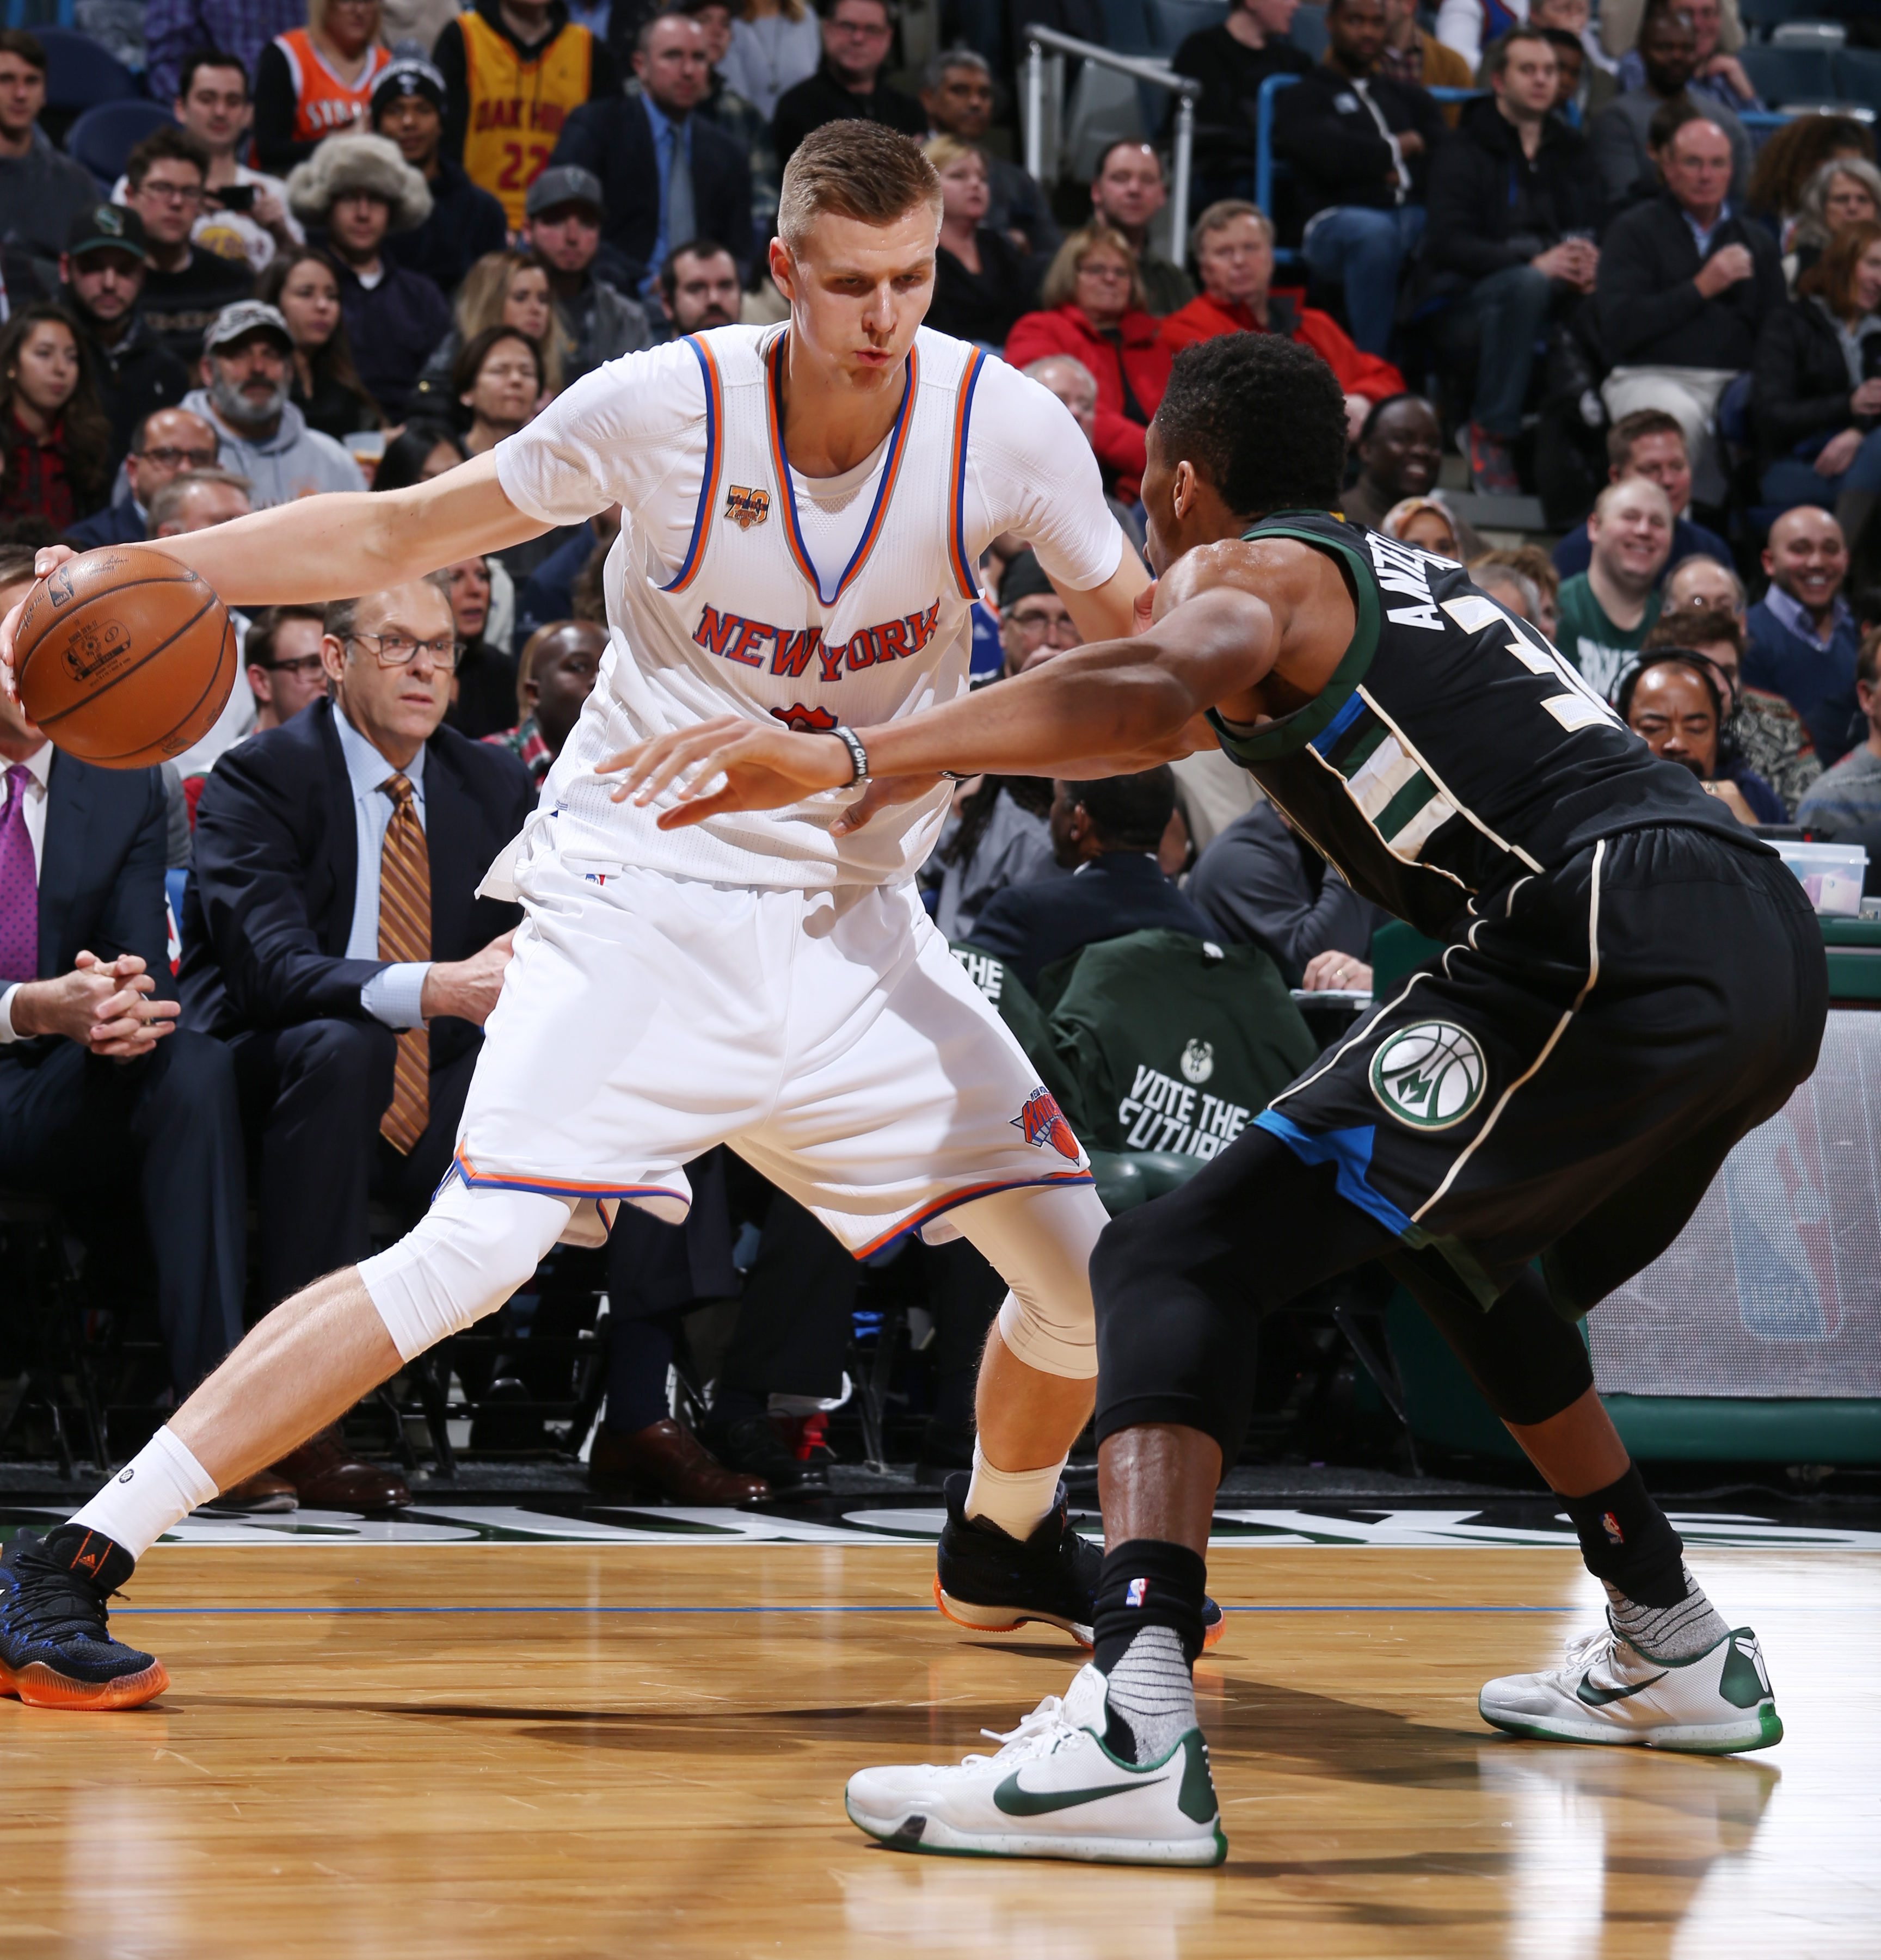 Milwaukee, WI - JANUARY 6: Kristaps Porzingis #6 of the New York Knicks handles the ball against the Milwaukee Bucks during the game on January 6, 2017 at the BMO Harris Bradley Center in Milwaukee, Wisconsin. NOTE TO USER: User expressly acknowledges and agrees that, by downloading and or using this Photograph, user is consenting to the terms and conditions of the Getty Images License Agreement. Mandatory Copyright Notice: Copyright 2017 NBAE (Photo by Gary Dineen/NBAE via Getty Images)